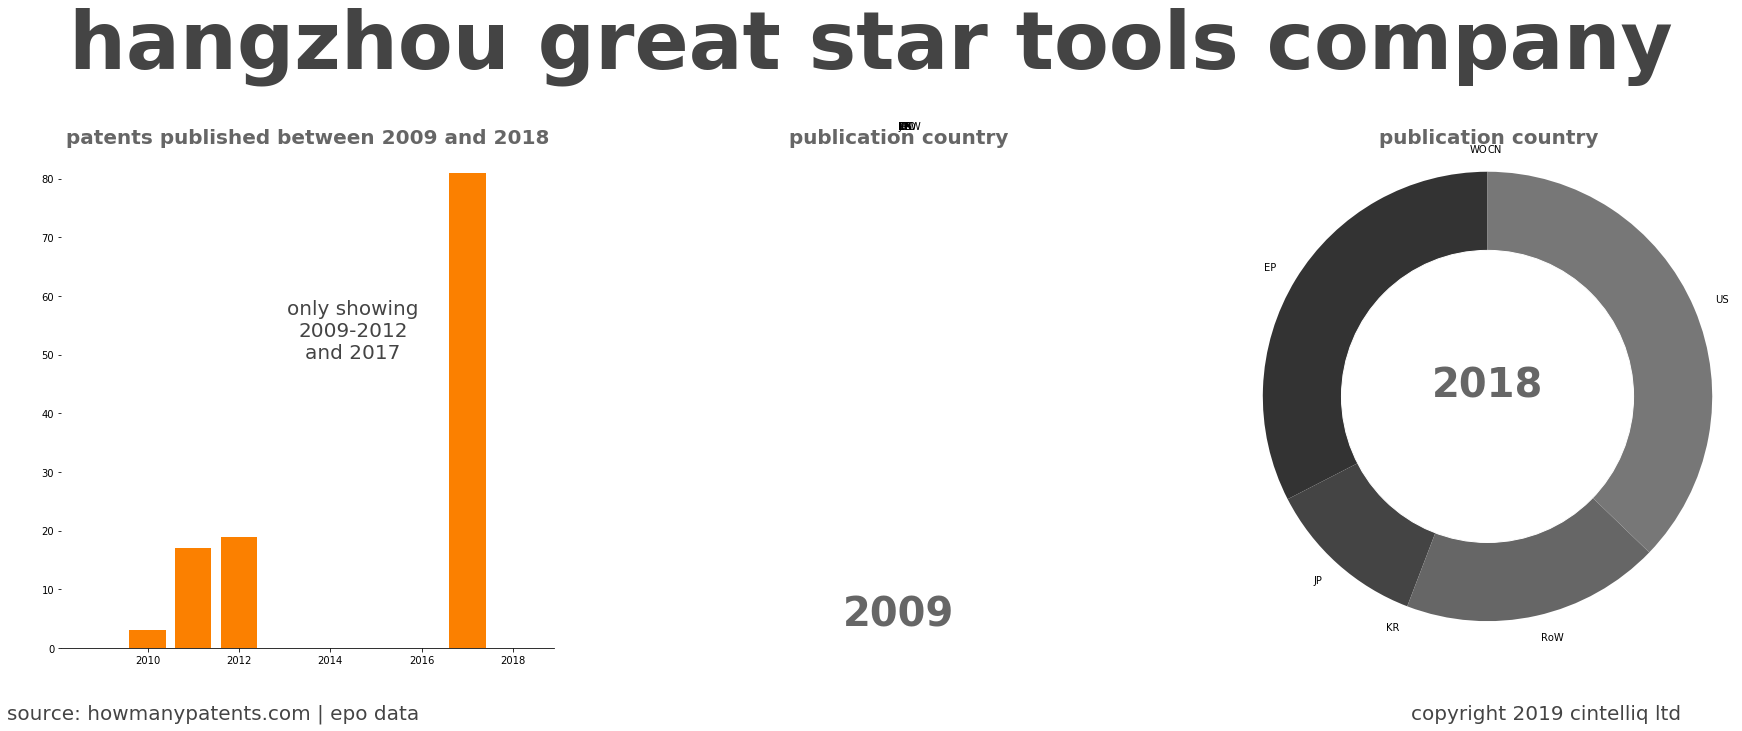 summary of patents for Hangzhou Great Star Tools Company